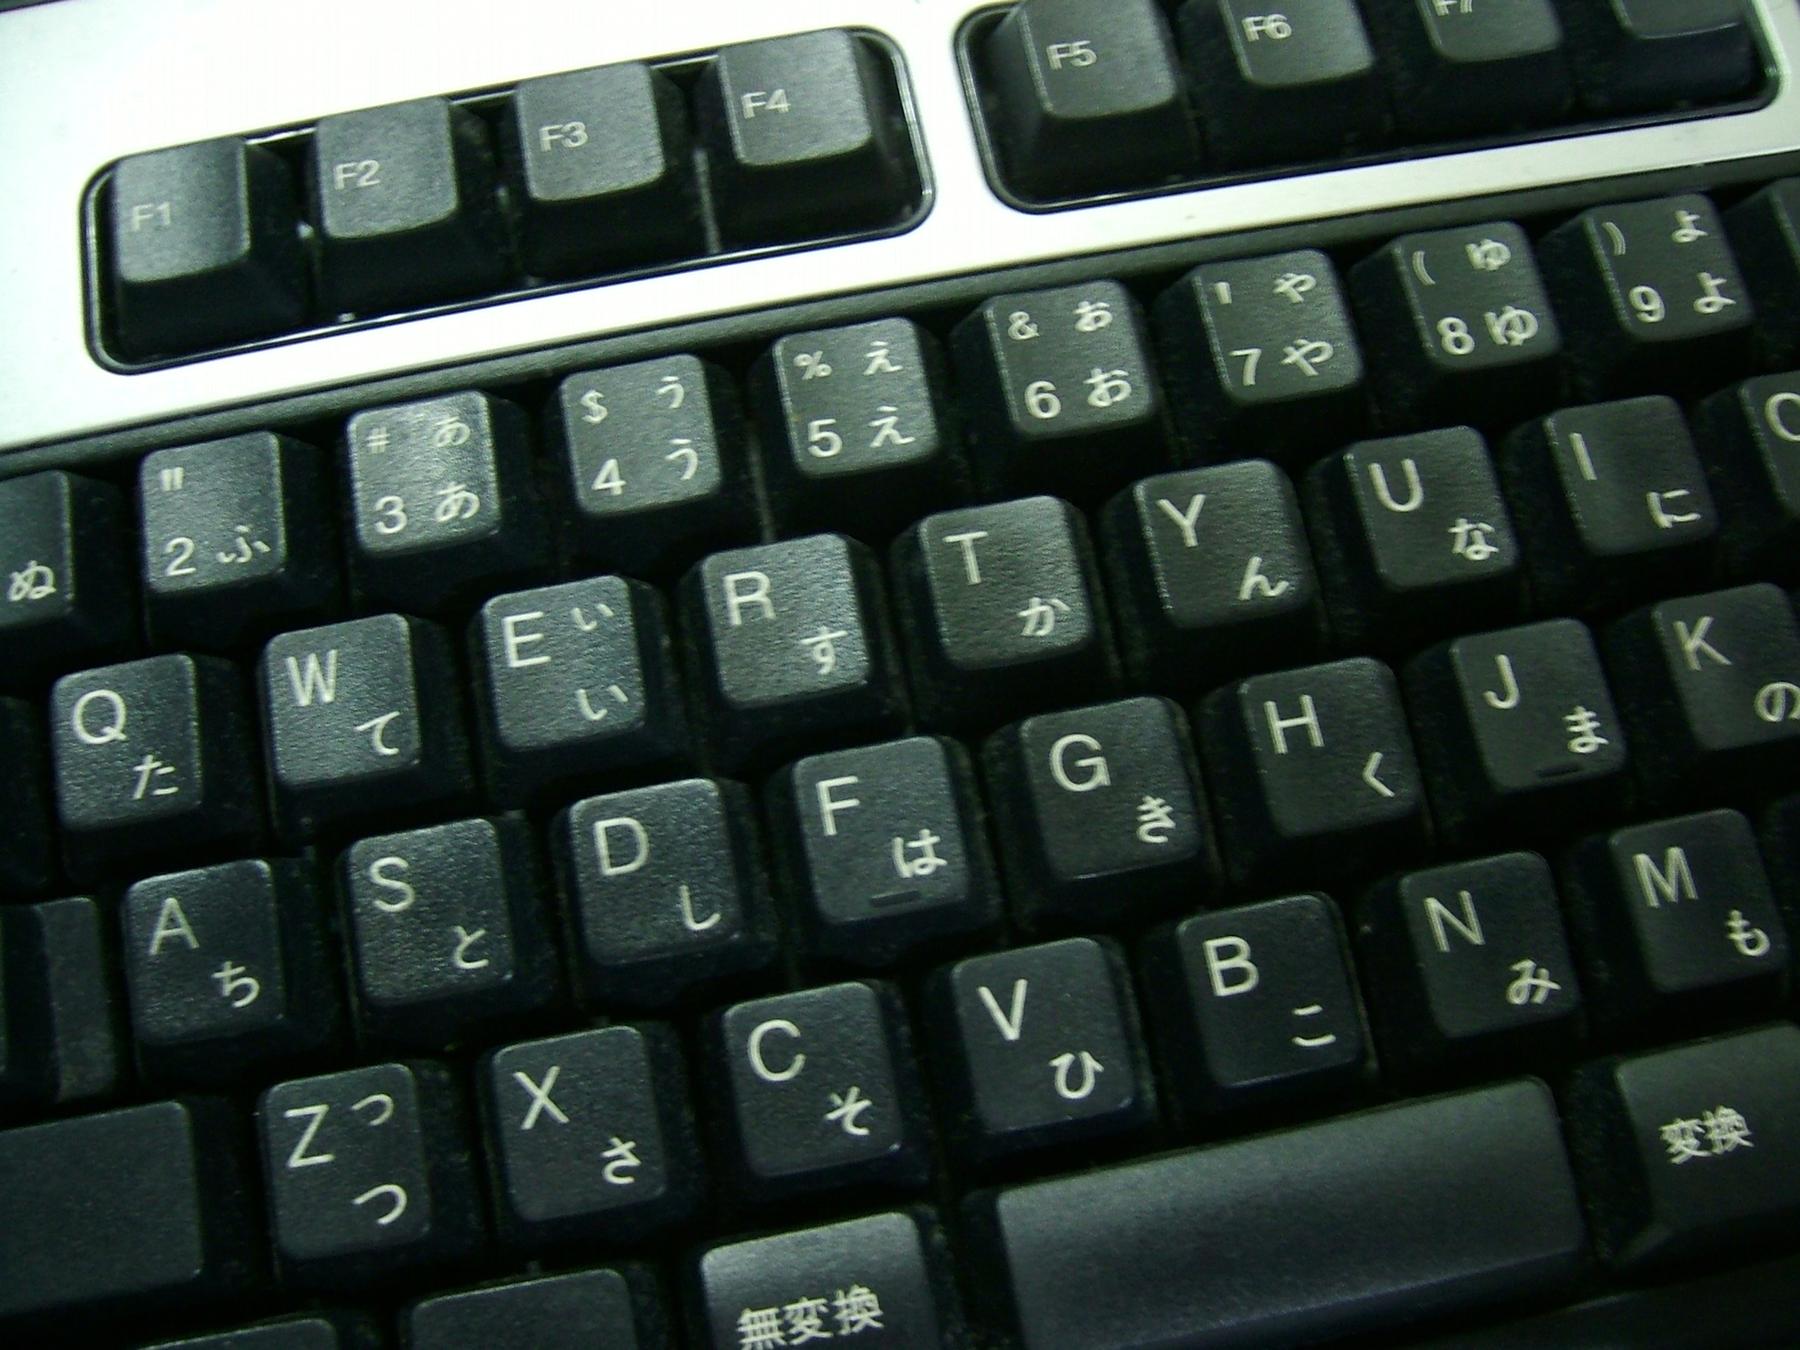 Keyboard-of-Japanese-language - a close up of a keyboard with a key on it